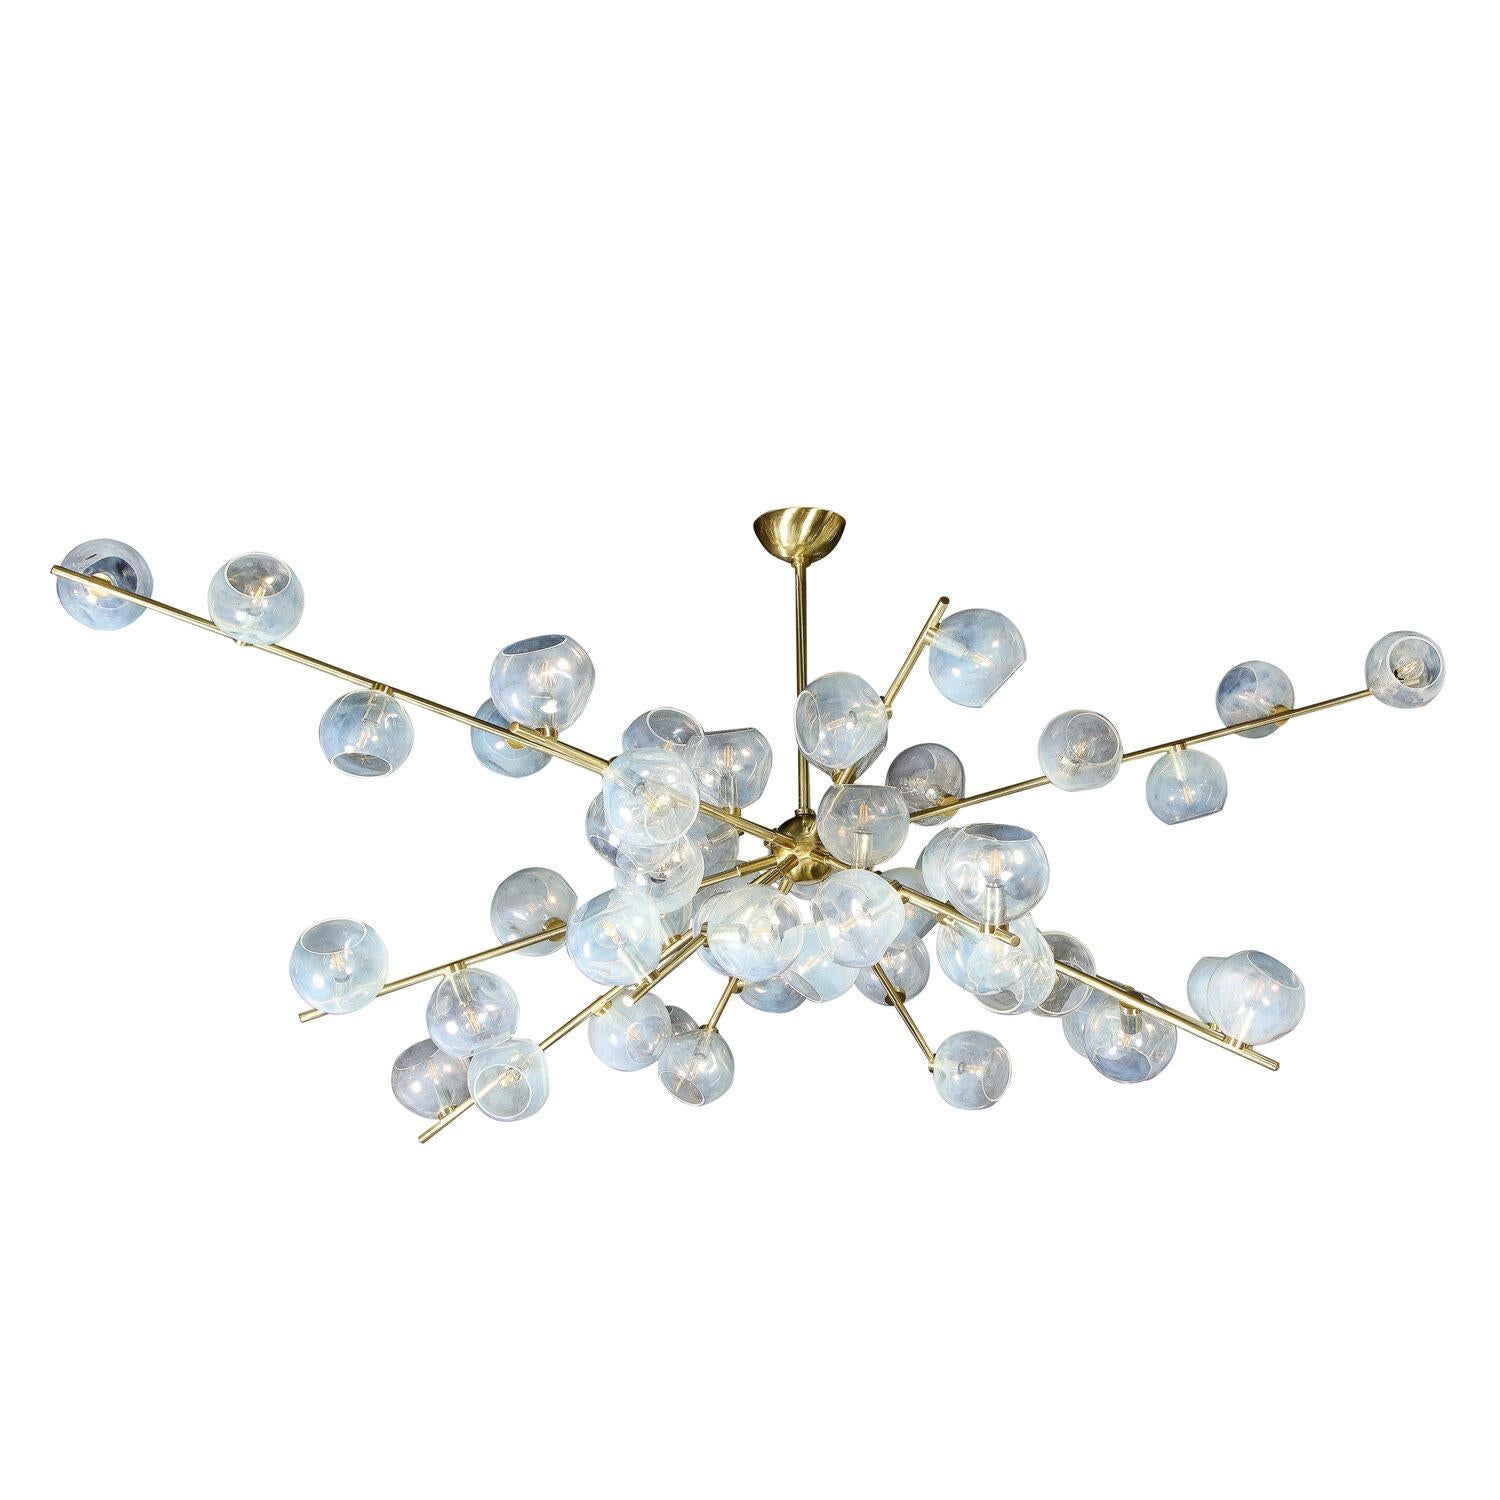 This stunning and monumental modernist chandelier is hand blown and handcrafted. It features an abundance of organic hand blown iridescent shades- each uniquely formed- attached to brass arms that appear to 